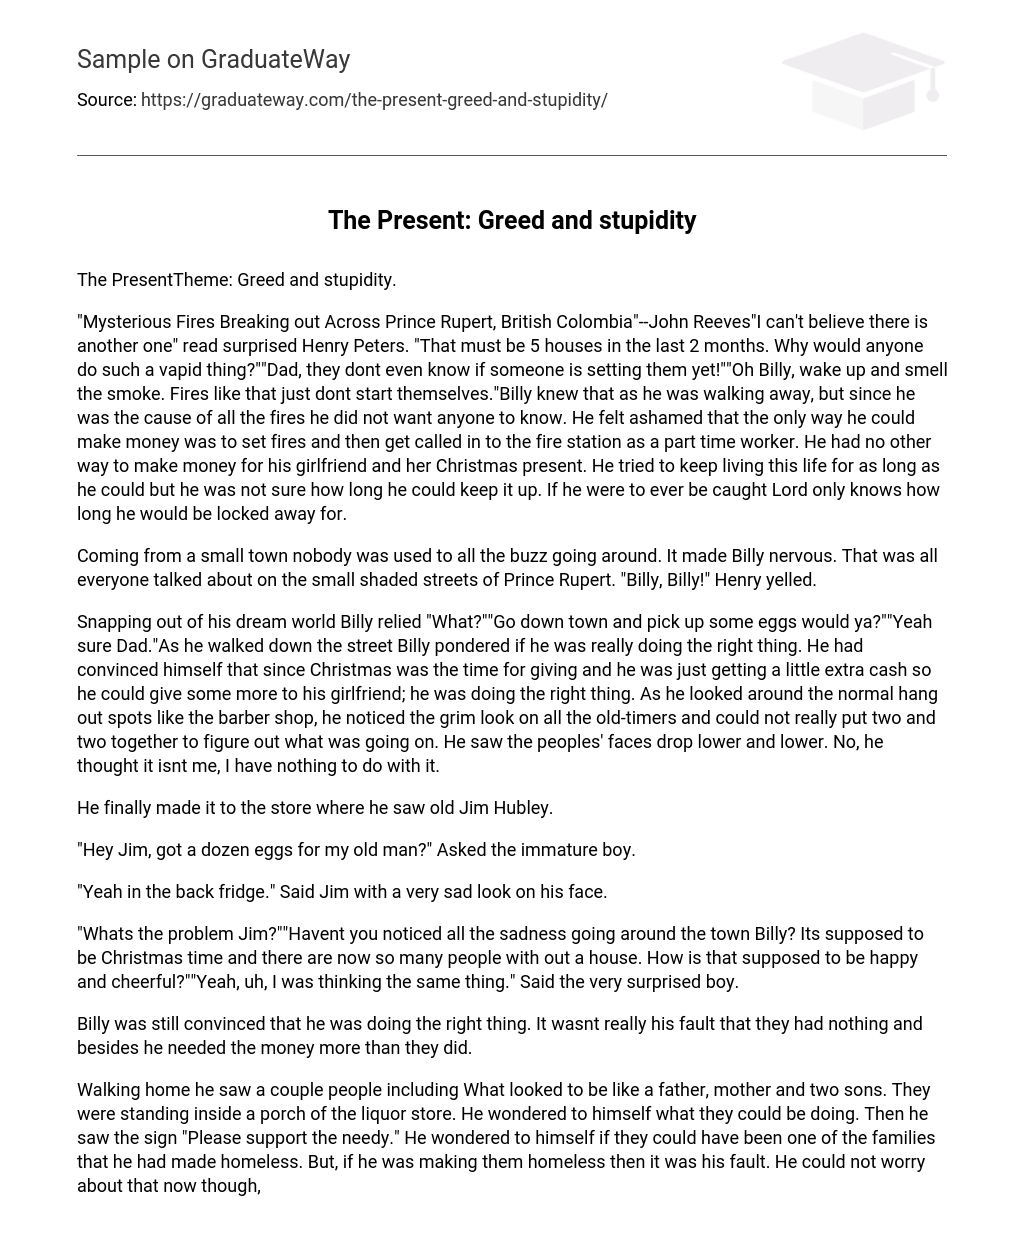 The Present: Greed and stupidity